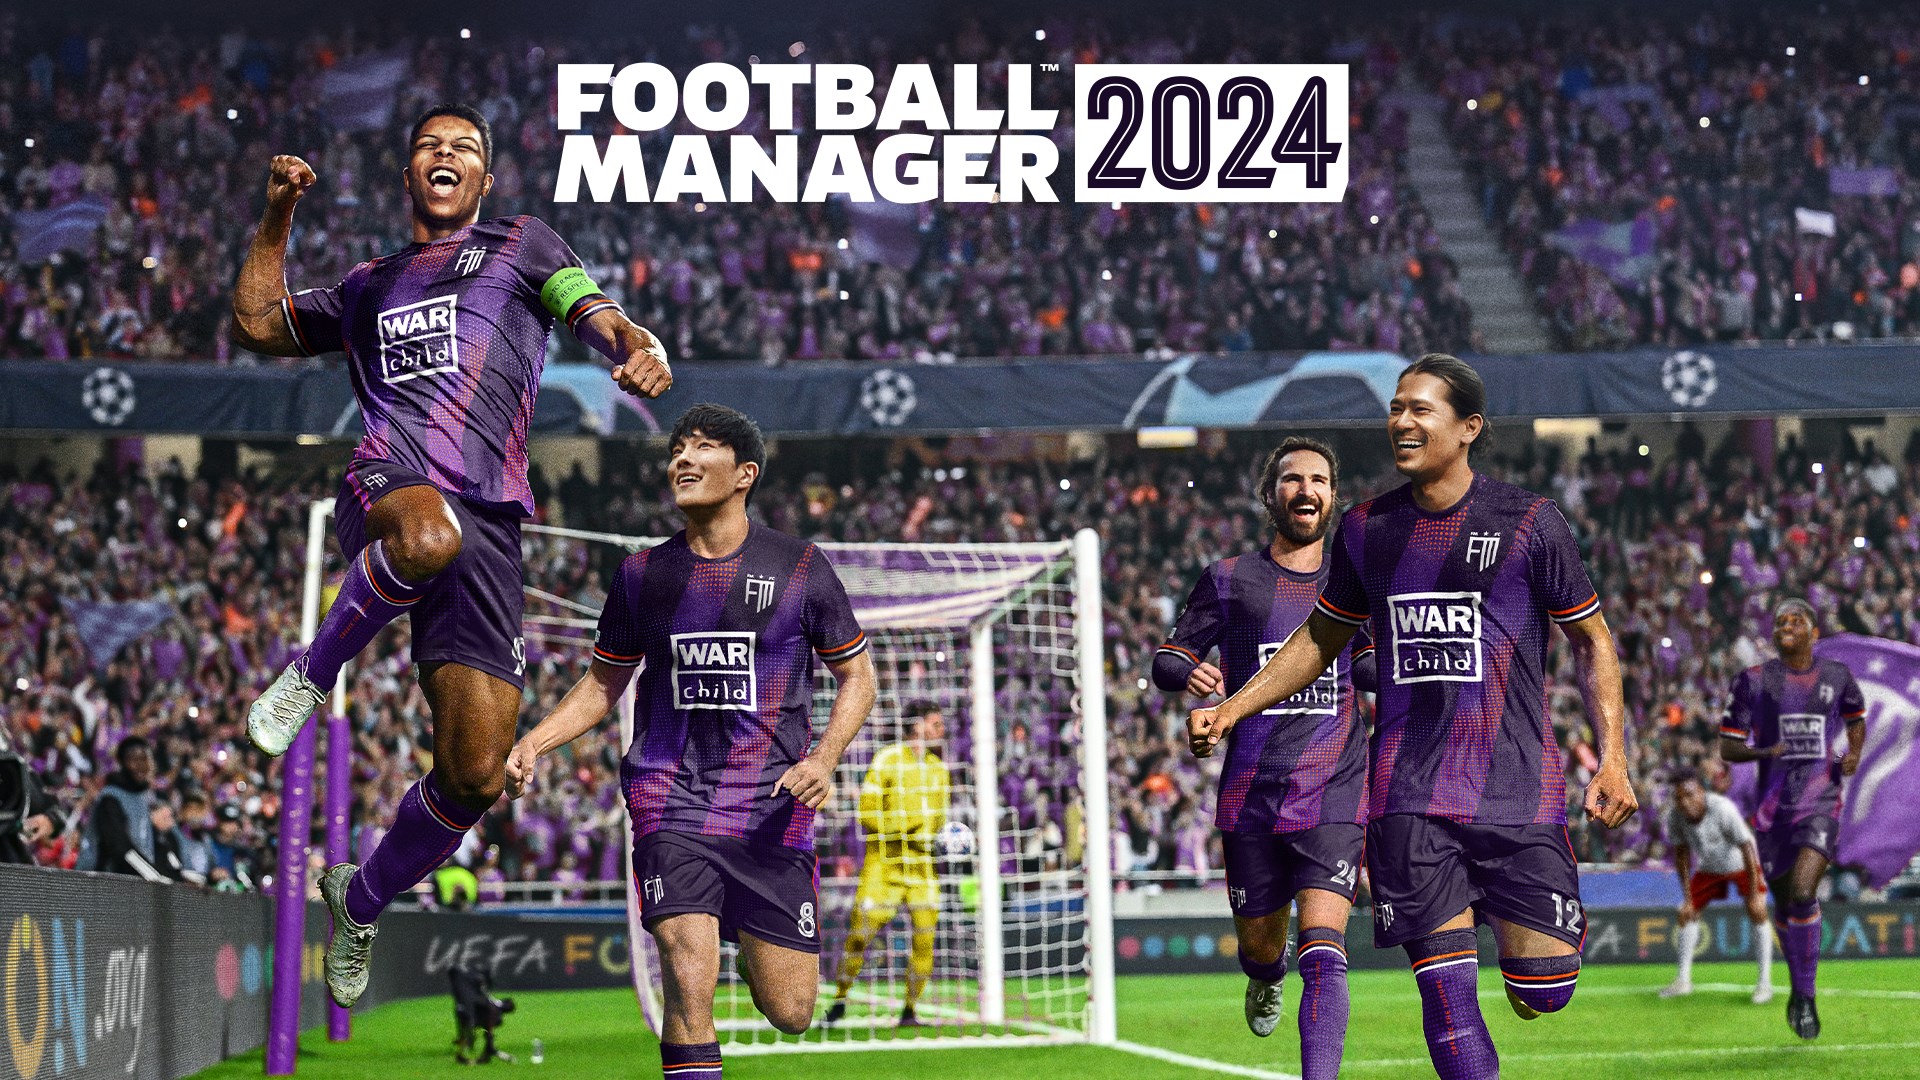 Football Manager 2024 Screenshots, Pictures, Wallpapers Xbox One